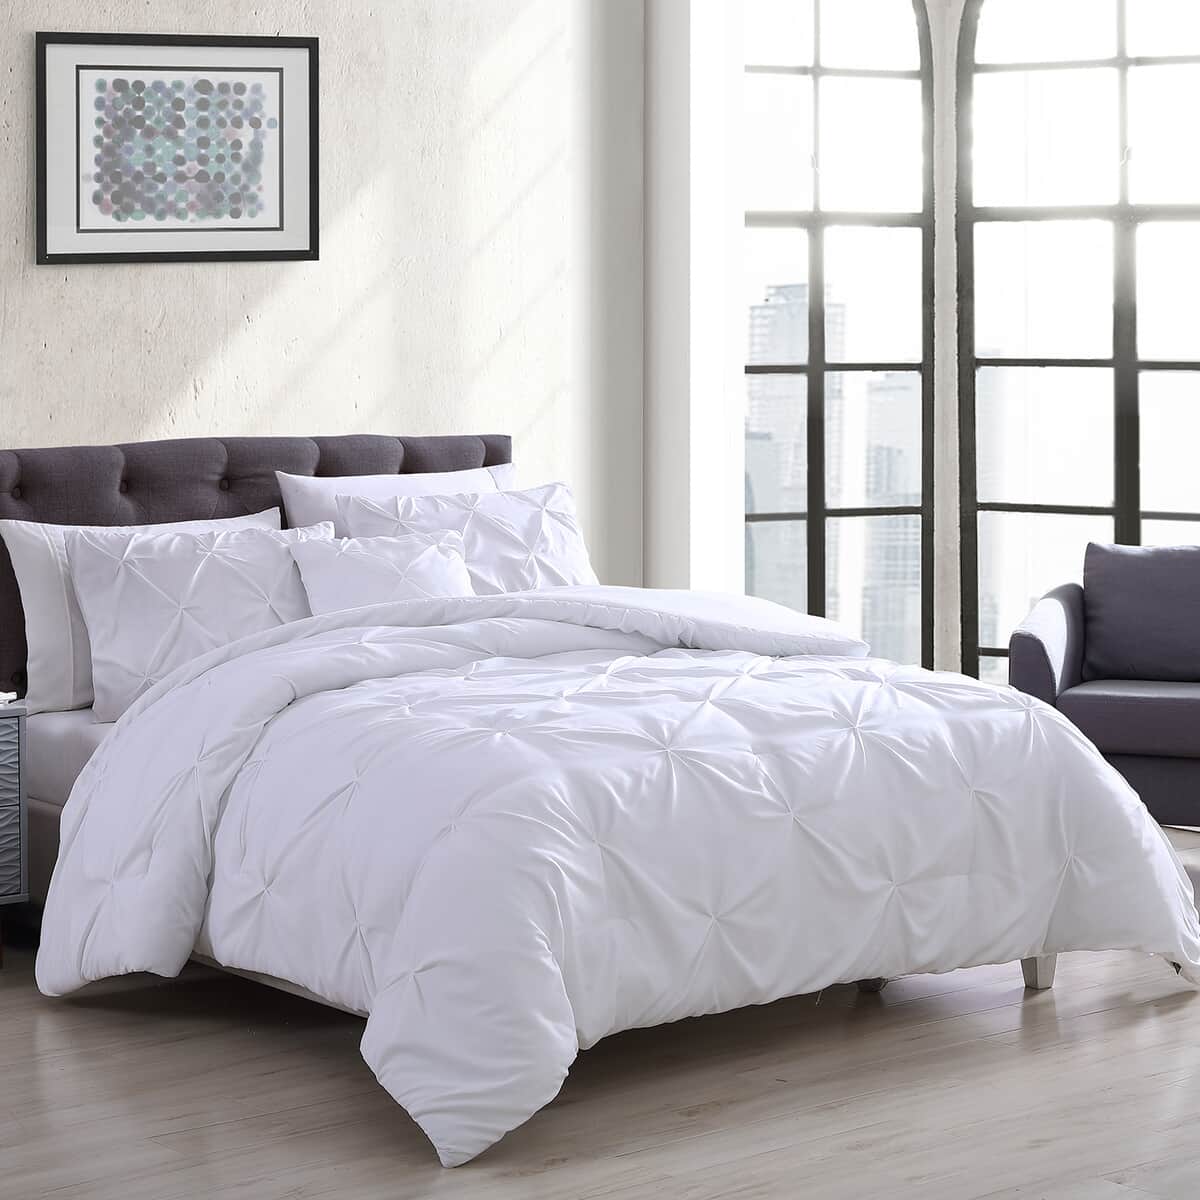 The Nesting Company- White Spruce 4 Piece Comforter Set - Queen image number 0